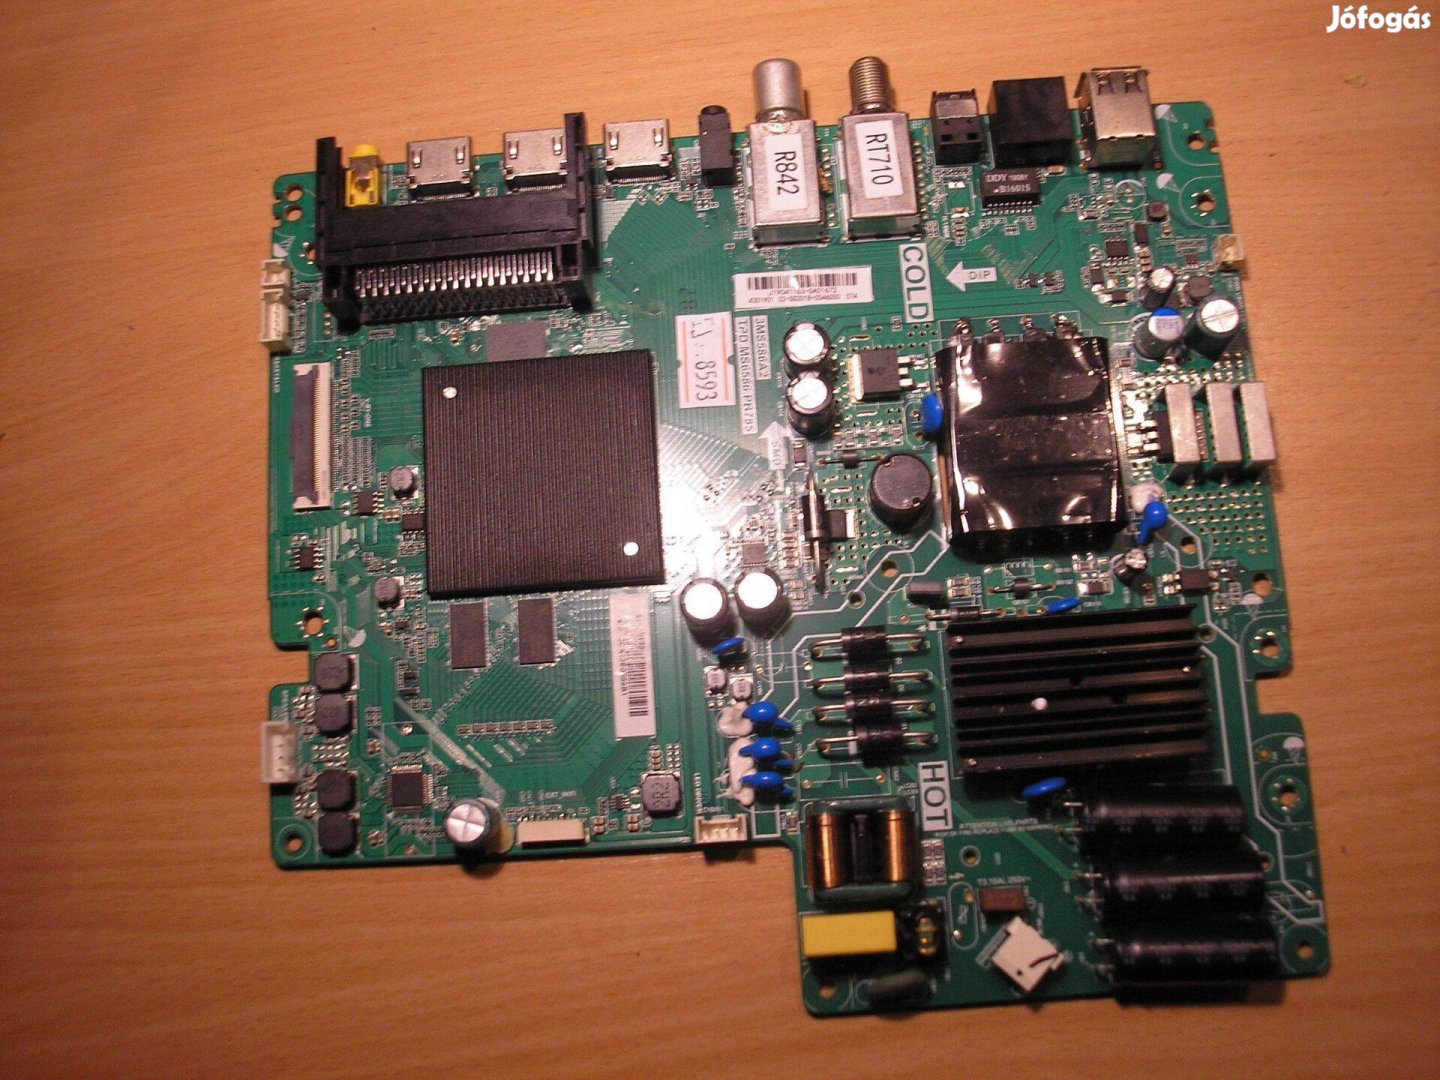 8593 Strong 43UB6203 mainboard 3MS586A2 TPD.MS6586.PB785 mainboard